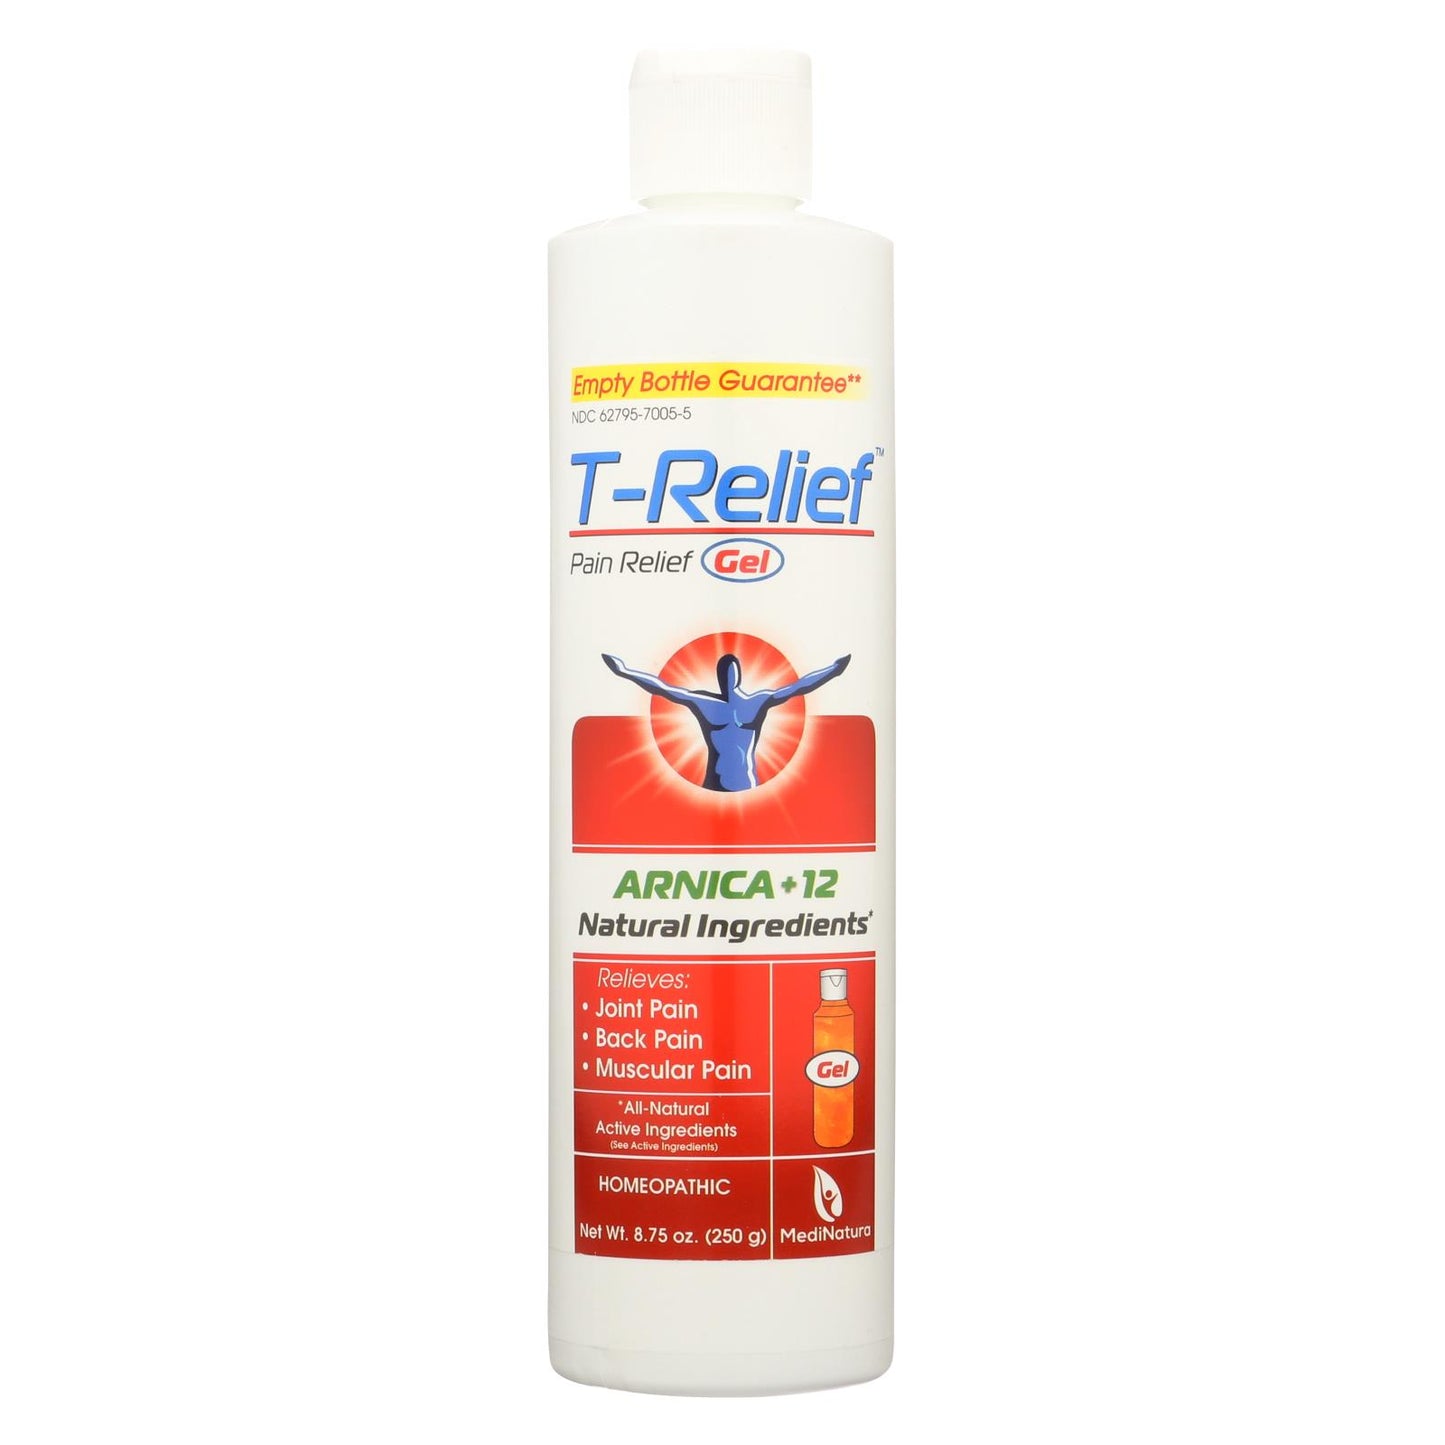 T-relief - Pain Relief Gel - Arnica - 8.75 Oz | OnlyNaturals.us